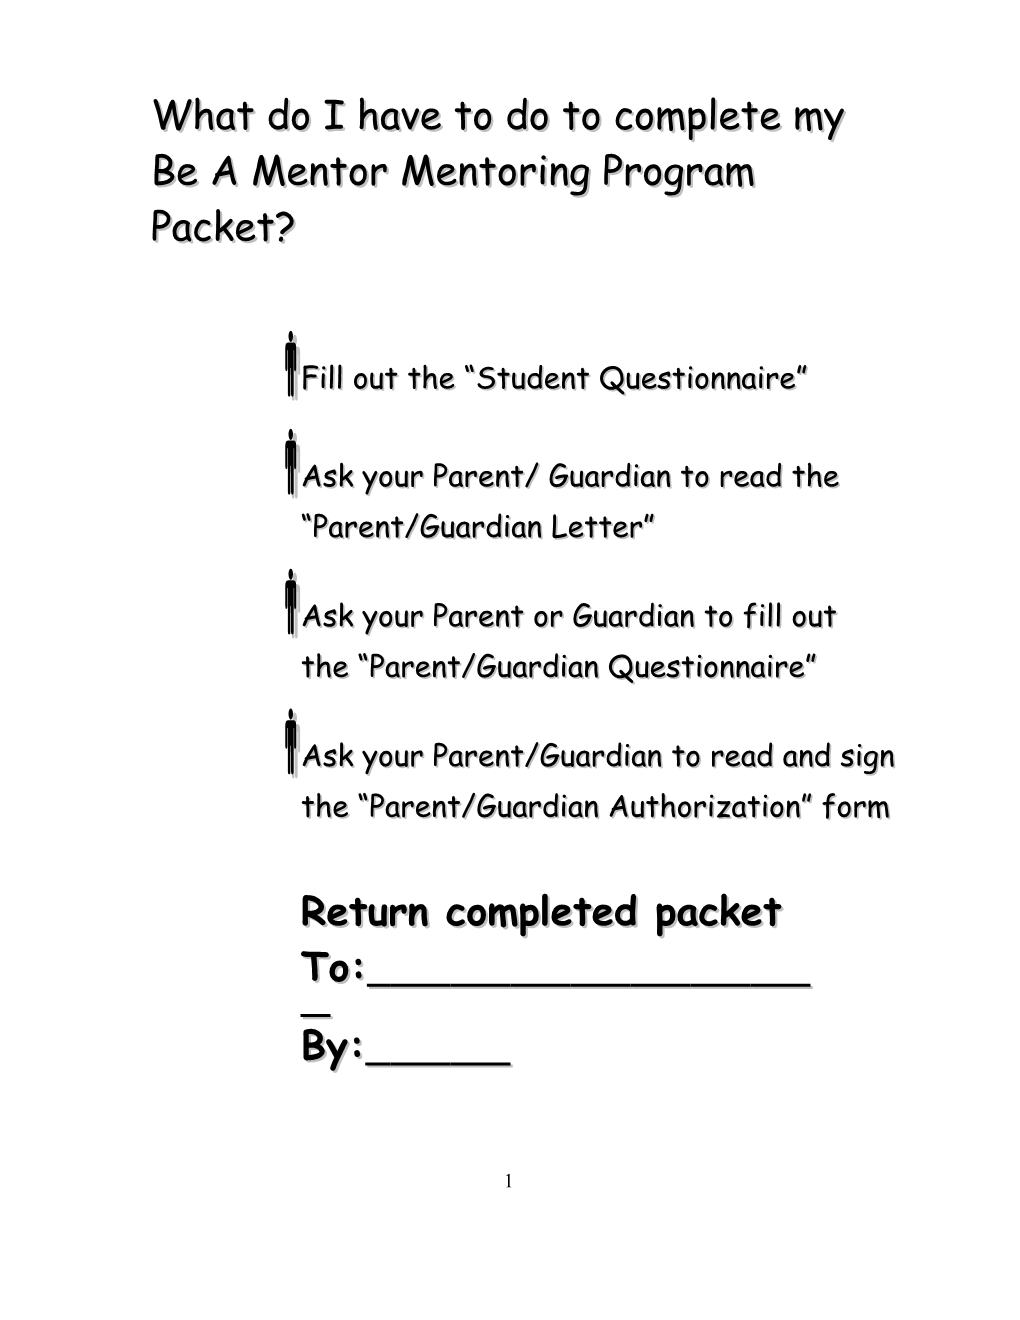 What Do I Have to Do to Complete My Be a Mentor Foster Care Mentoring Program Packet